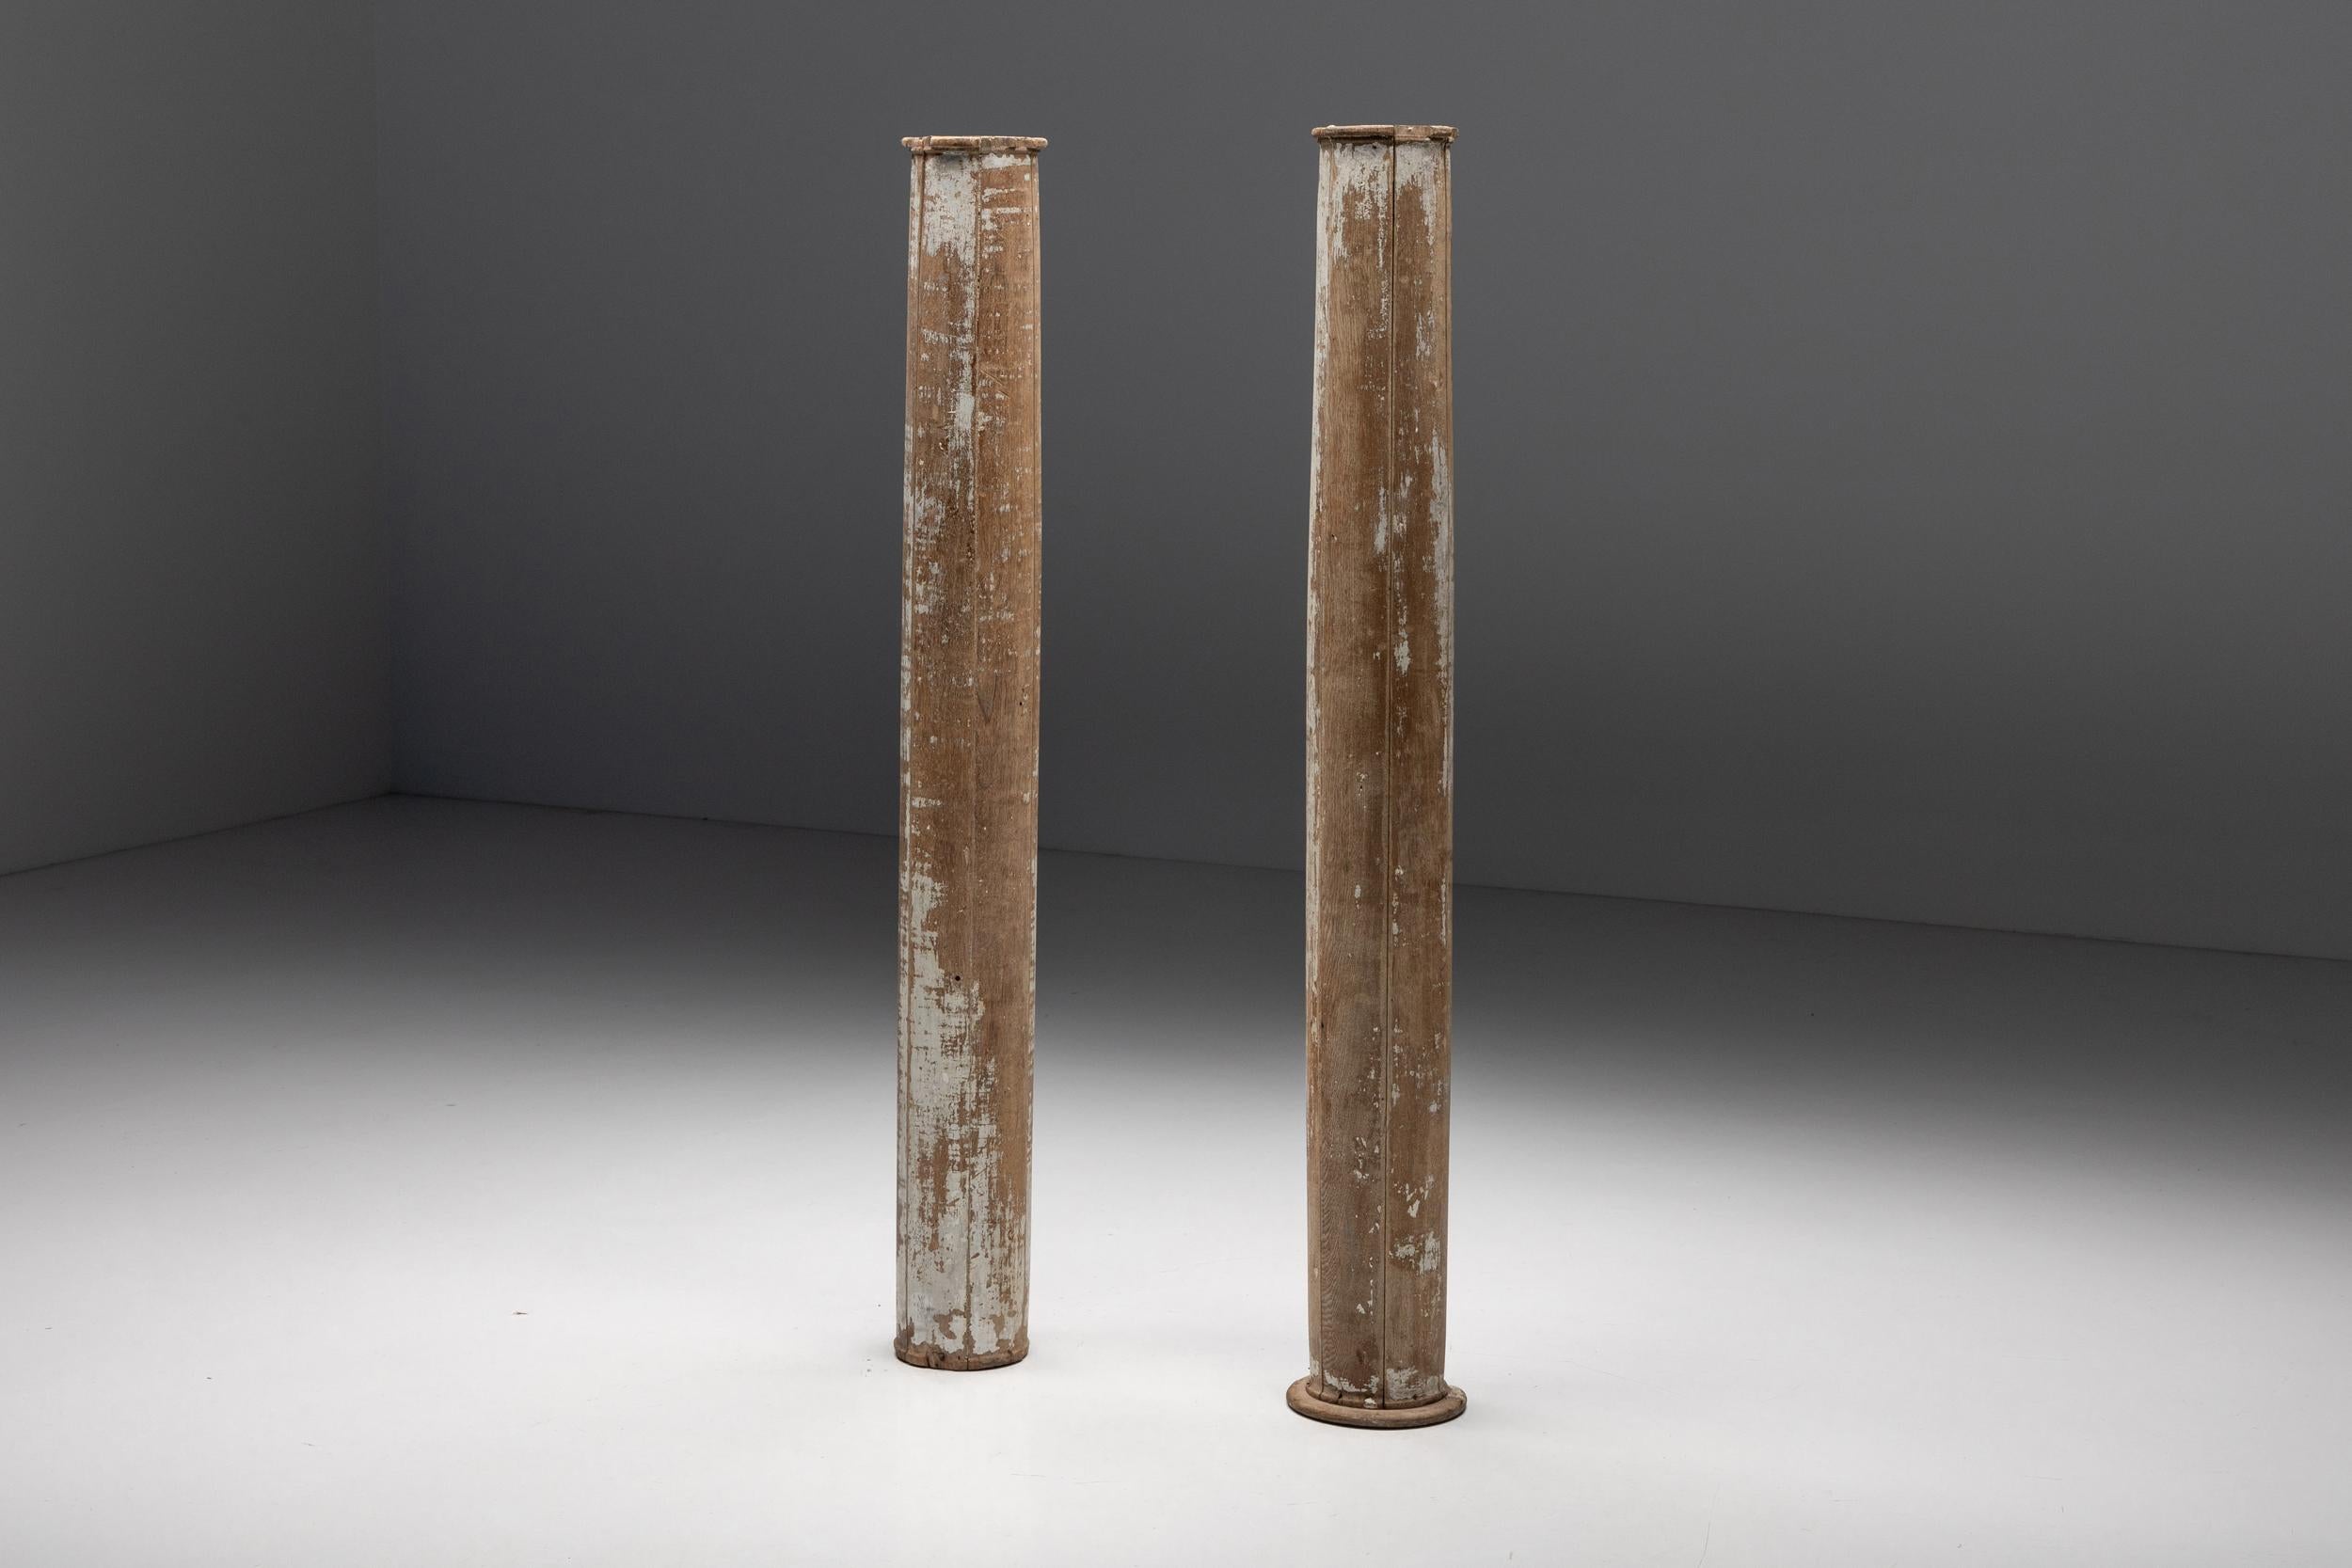 Patinated; Wood; Columns; Pedestal; 19th Century; Rustic; Hallway; Foyer; Entry; 

These partly patinated wooden columns date from the 19th century. They have a rustic feel and would fit well in a monumental hallway, foyer or entry. This set of